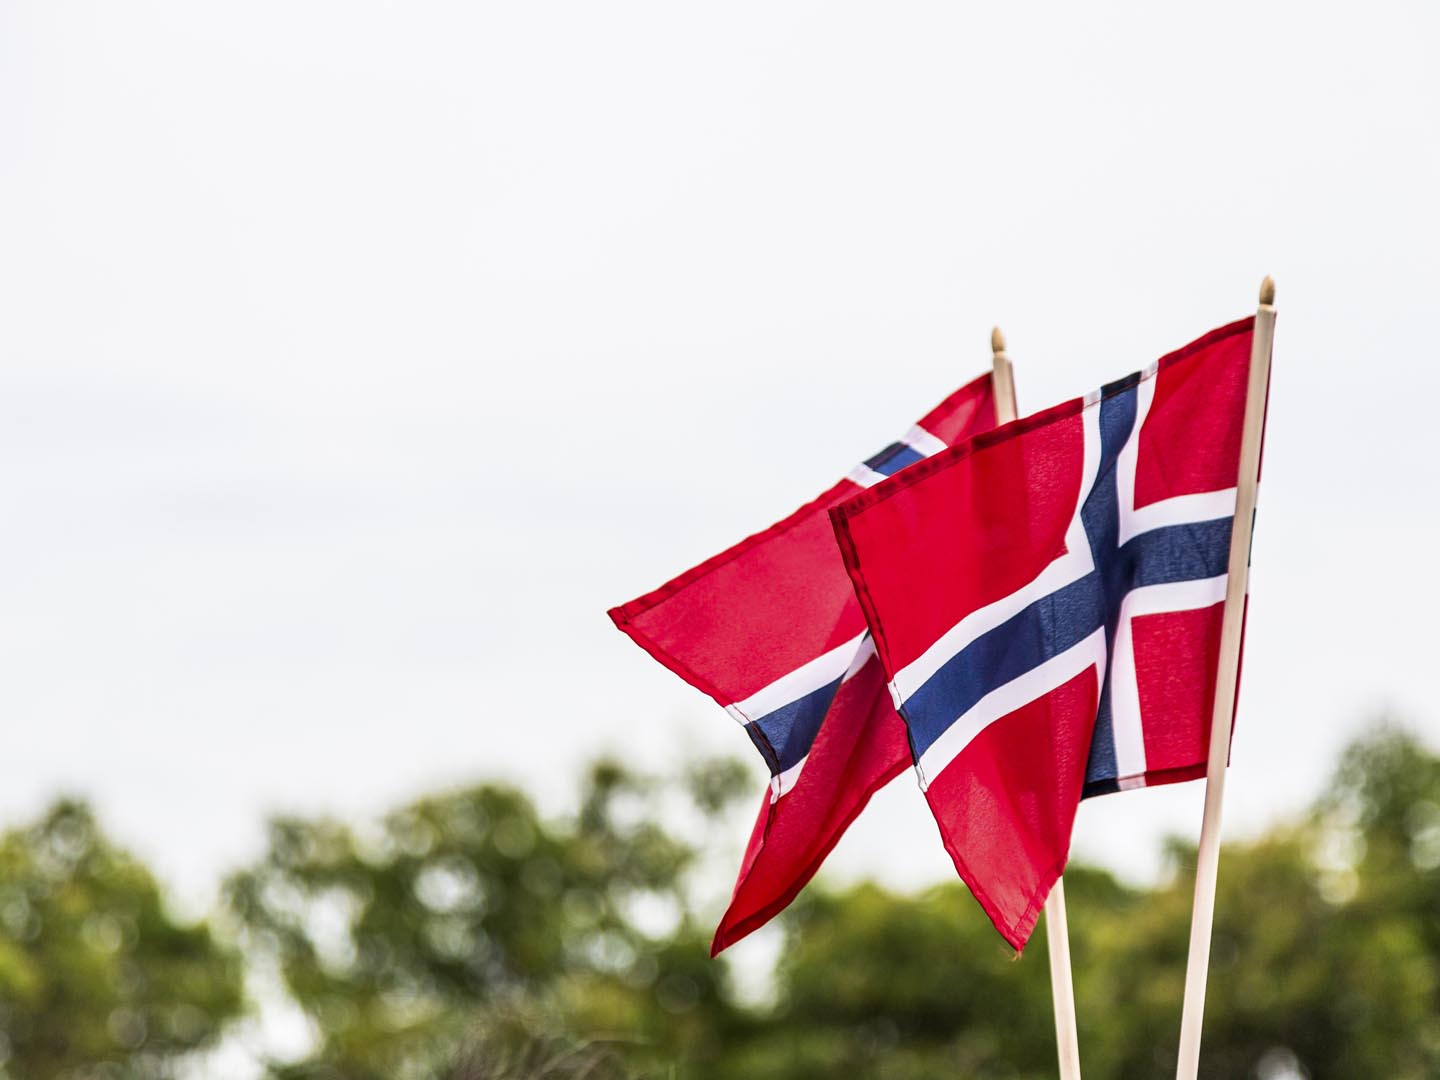 Two Norwegian flags blowing in the wind. The flag of Norway is red with an indigo blue Scandinavian cross fimbriated in white that extends to the edges of the flag; the vertical part of the cross is shifted to the hoist side in the style of the Dannebrog, the flag of Denmark.